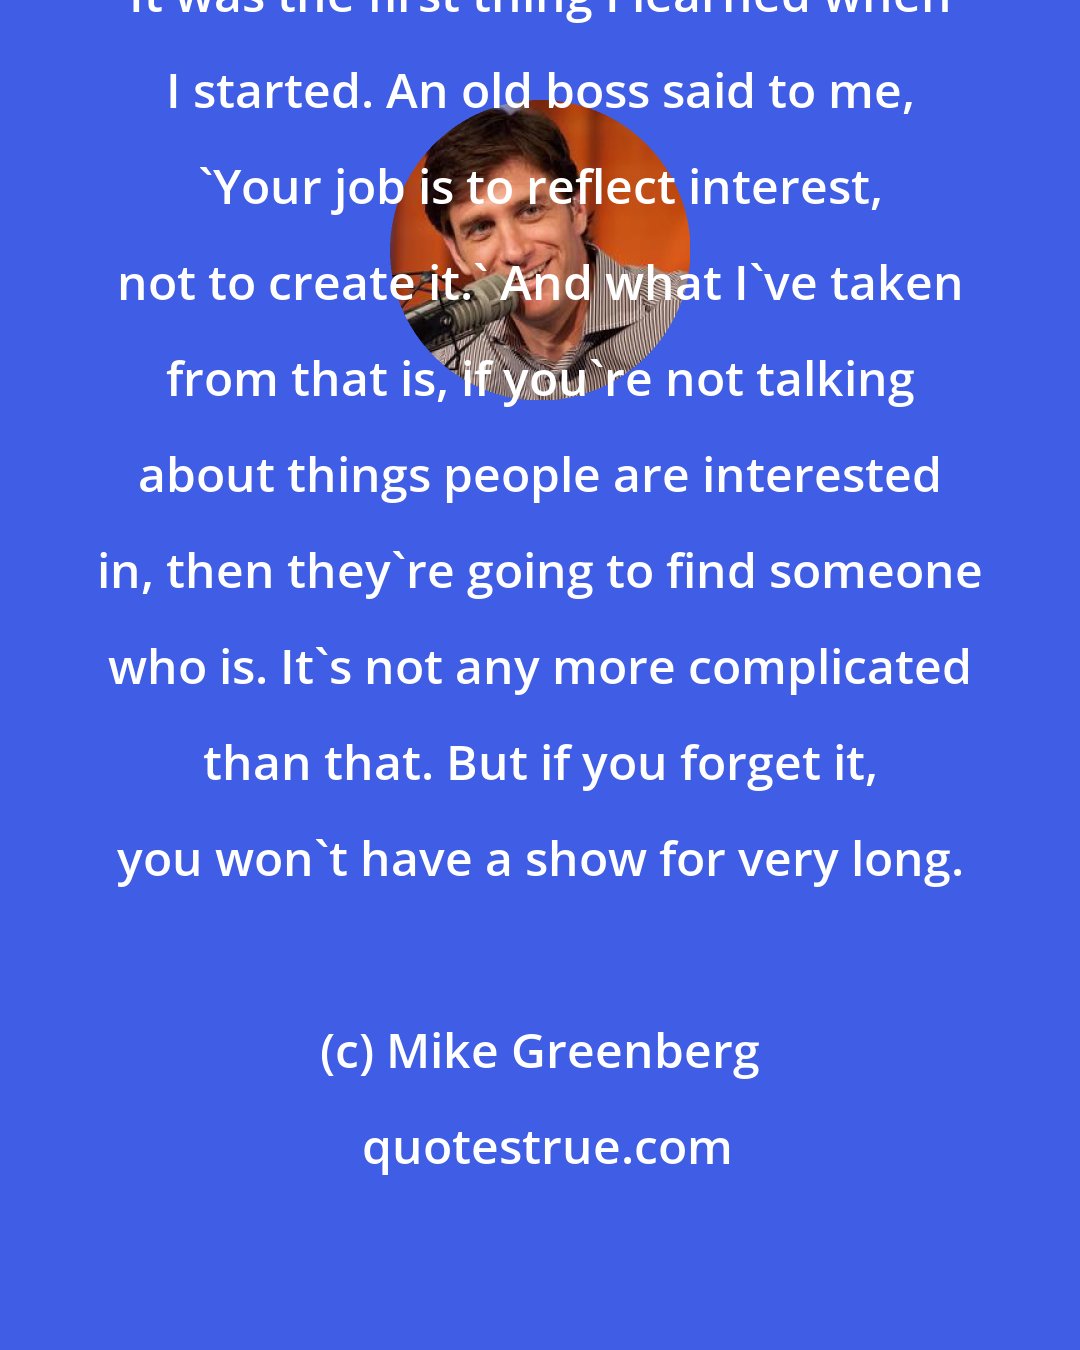 Mike Greenberg: It was the first thing I learned when I started. An old boss said to me, 'Your job is to reflect interest, not to create it.' And what I've taken from that is, if you're not talking about things people are interested in, then they're going to find someone who is. It's not any more complicated than that. But if you forget it, you won't have a show for very long.